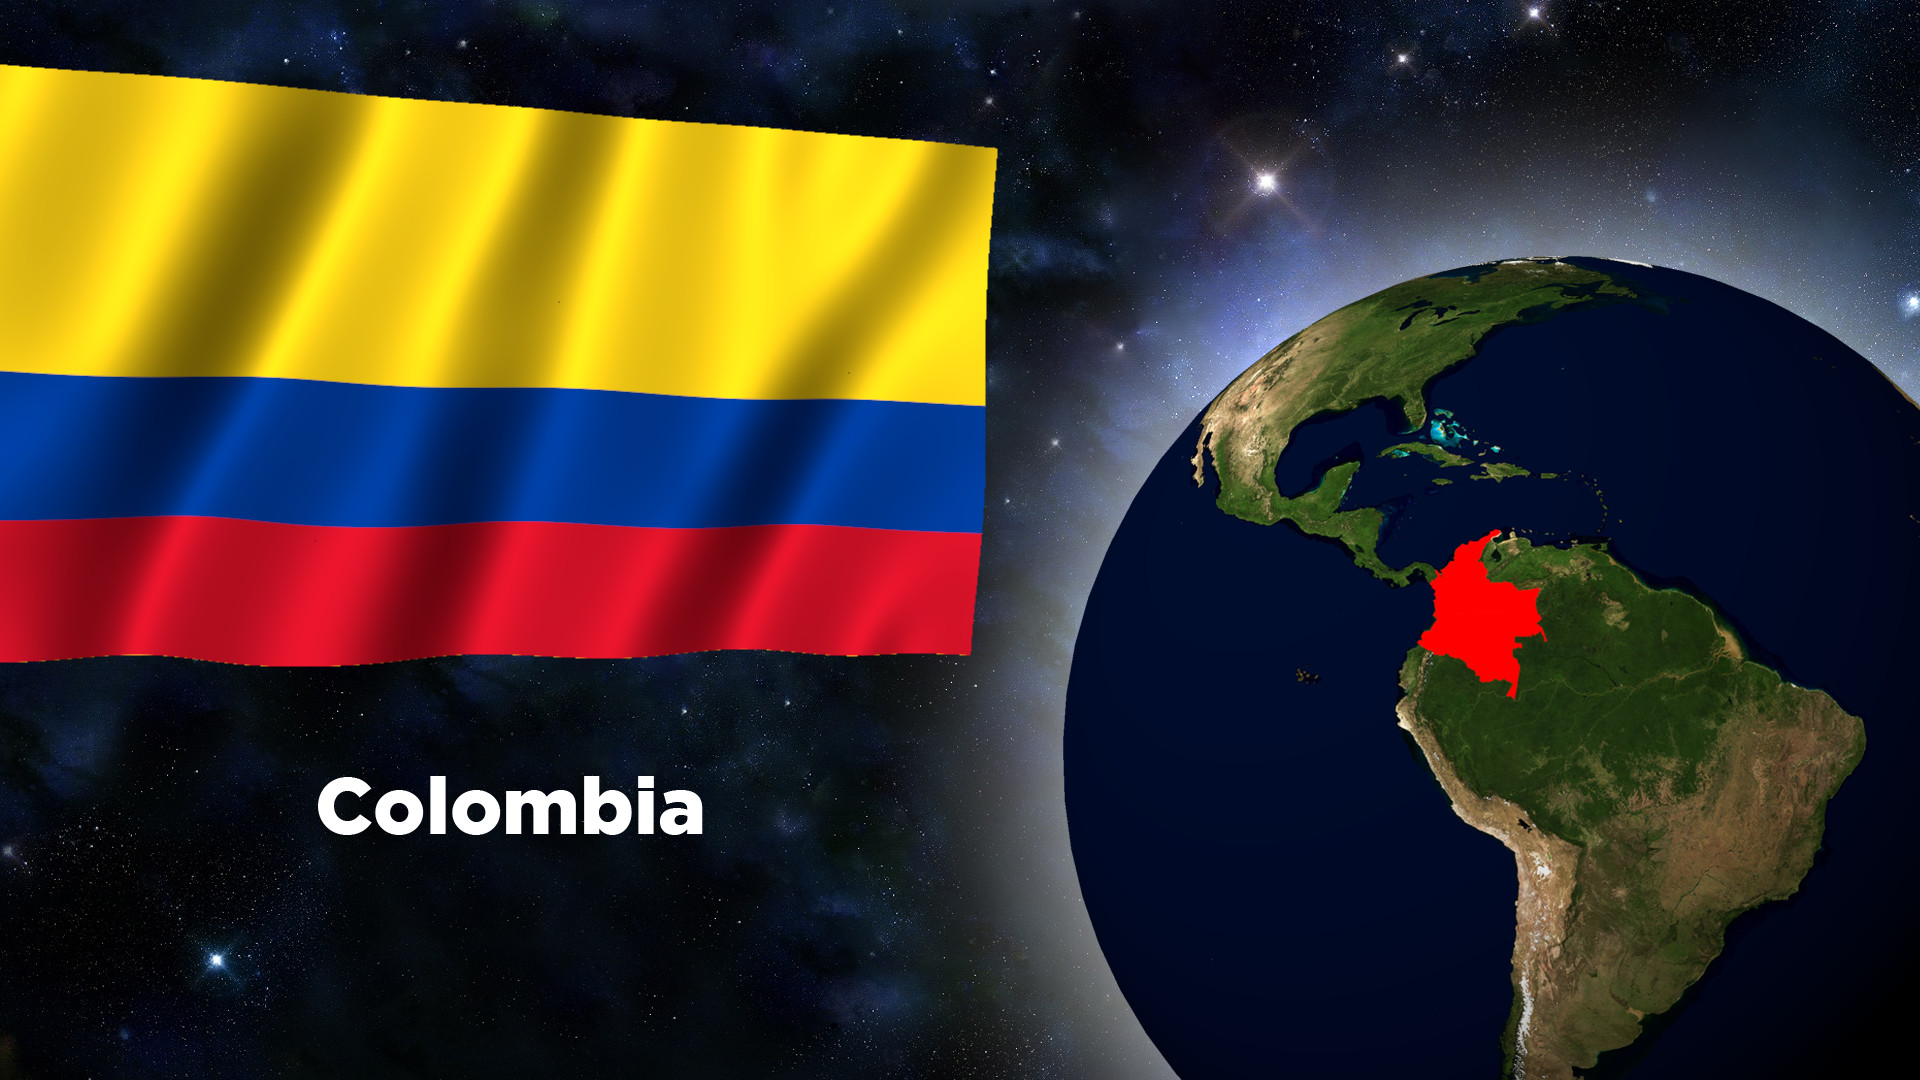 1920x1080 Flag Wallpaper - Colombia by darellnonis Flag Wallpaper - Colombia by  darellnonis